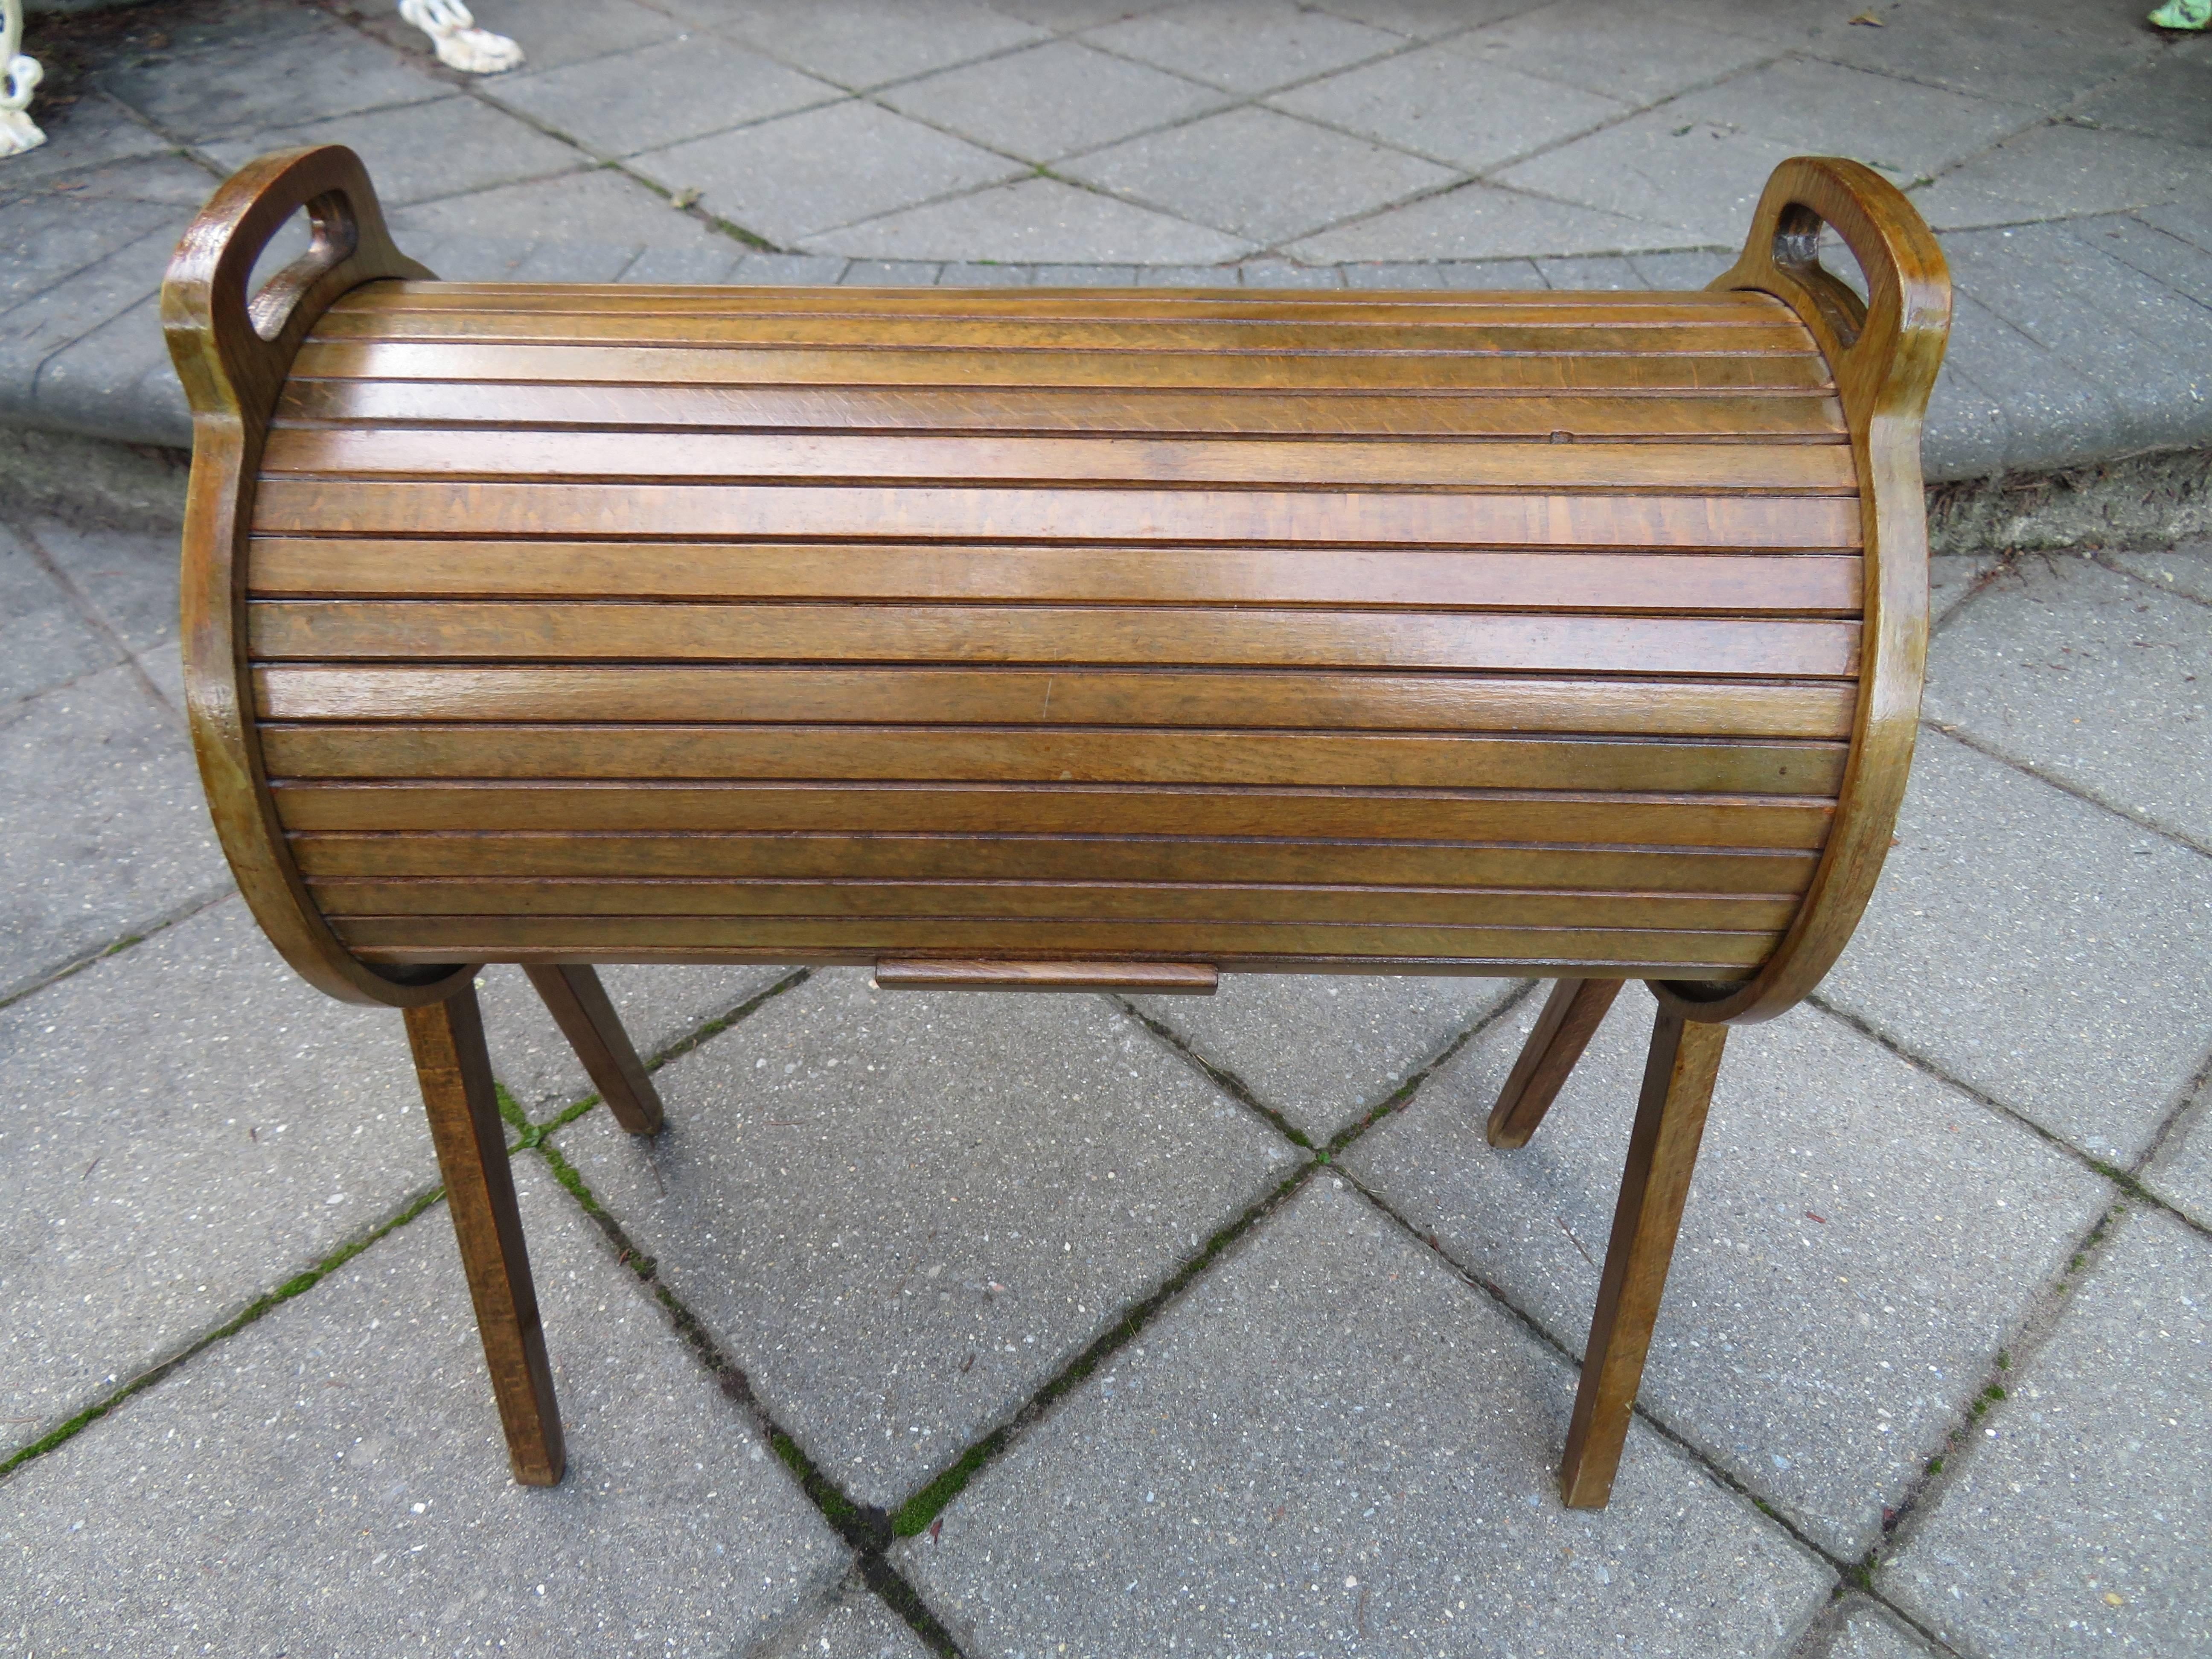 Wonderful Danish modern style cylindrical roll-top sewing caddy/basket. We just love this unusual piece which can be used for storage of anything really-sewing,knitting, or crafts.